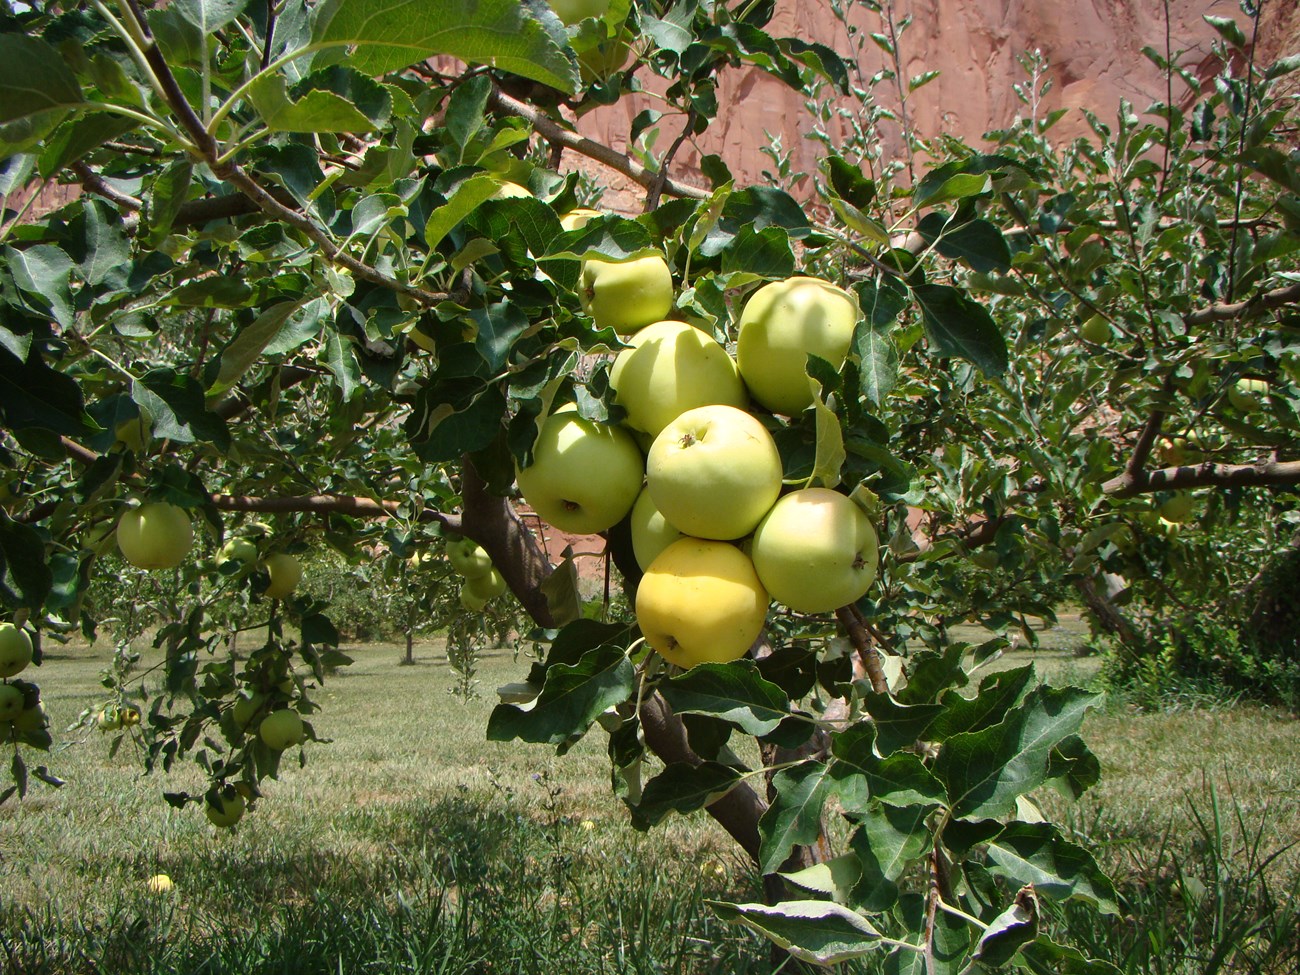 Clump of pale green and yellow apples on tree branch covered in dark green leaves, with grass and red cliffs in the background.